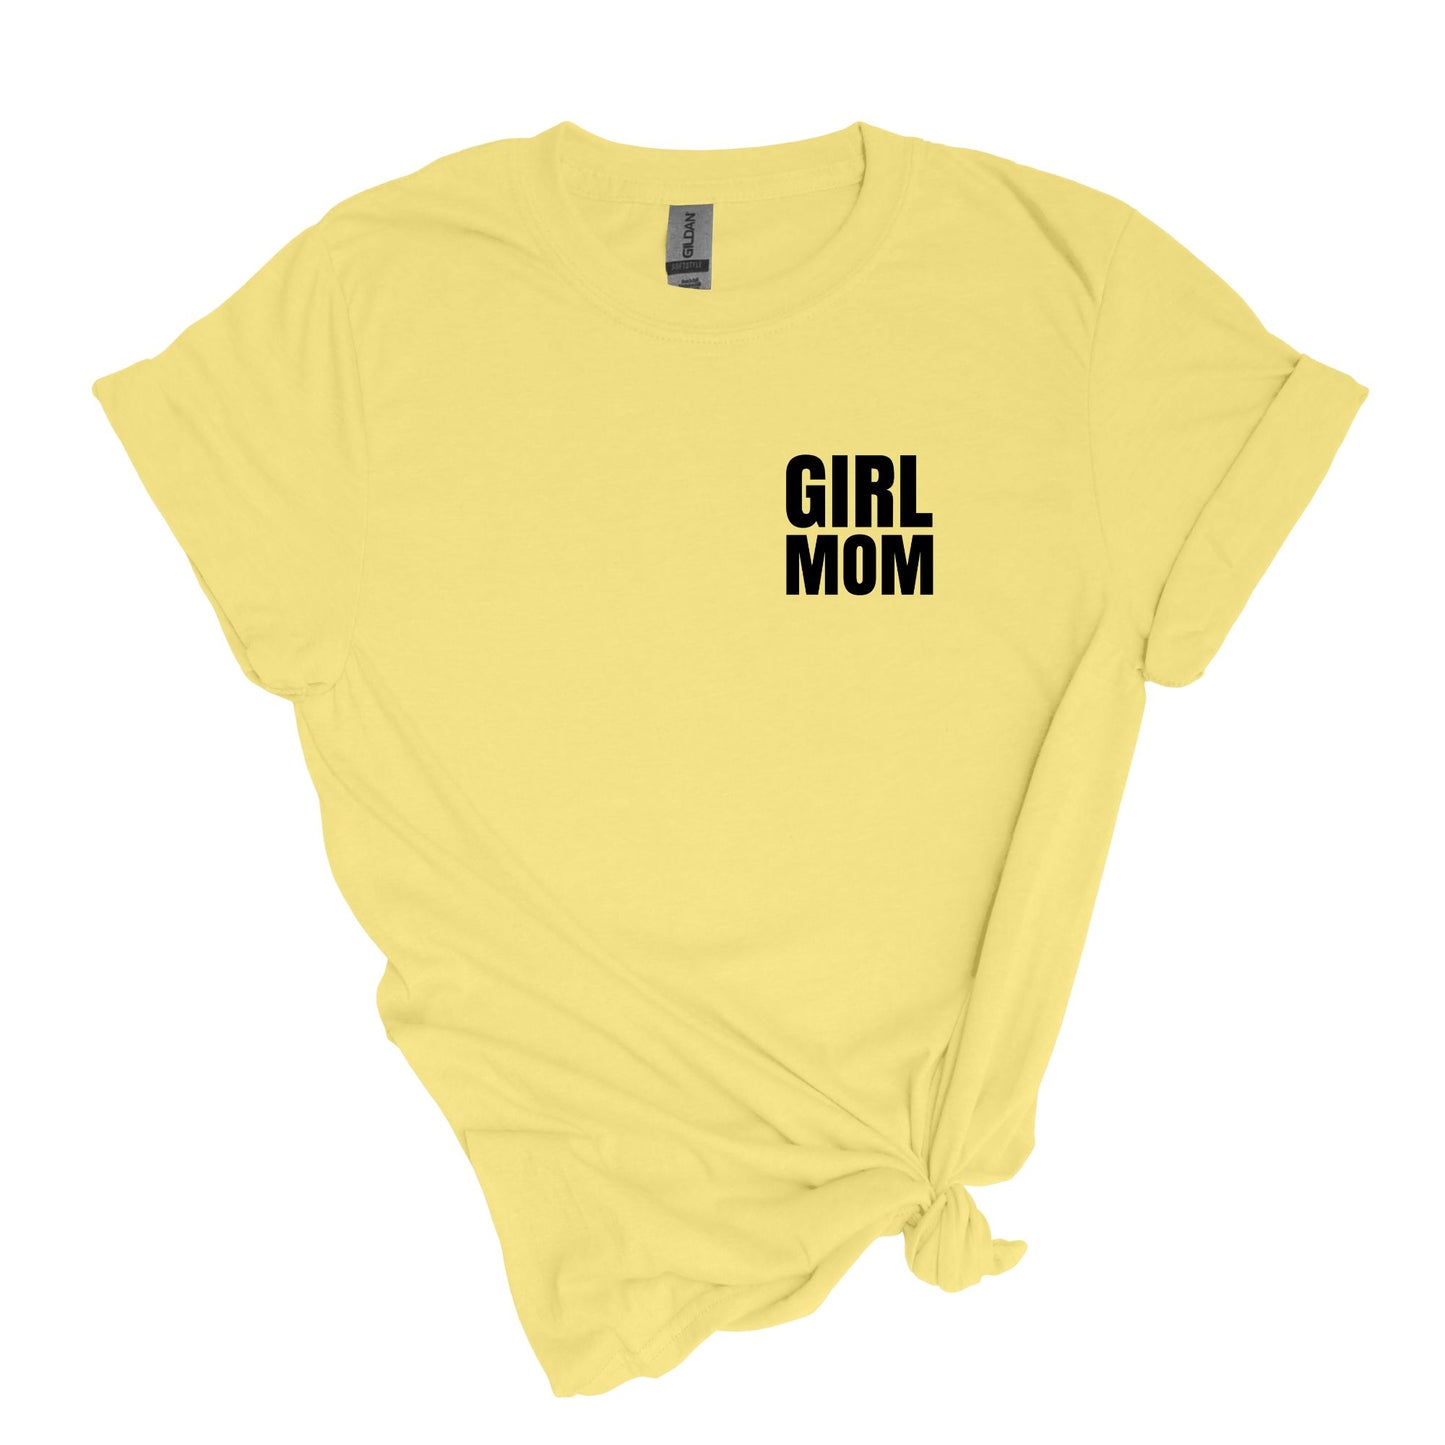 GIRL MOM - Adult Soft-style T-shirt